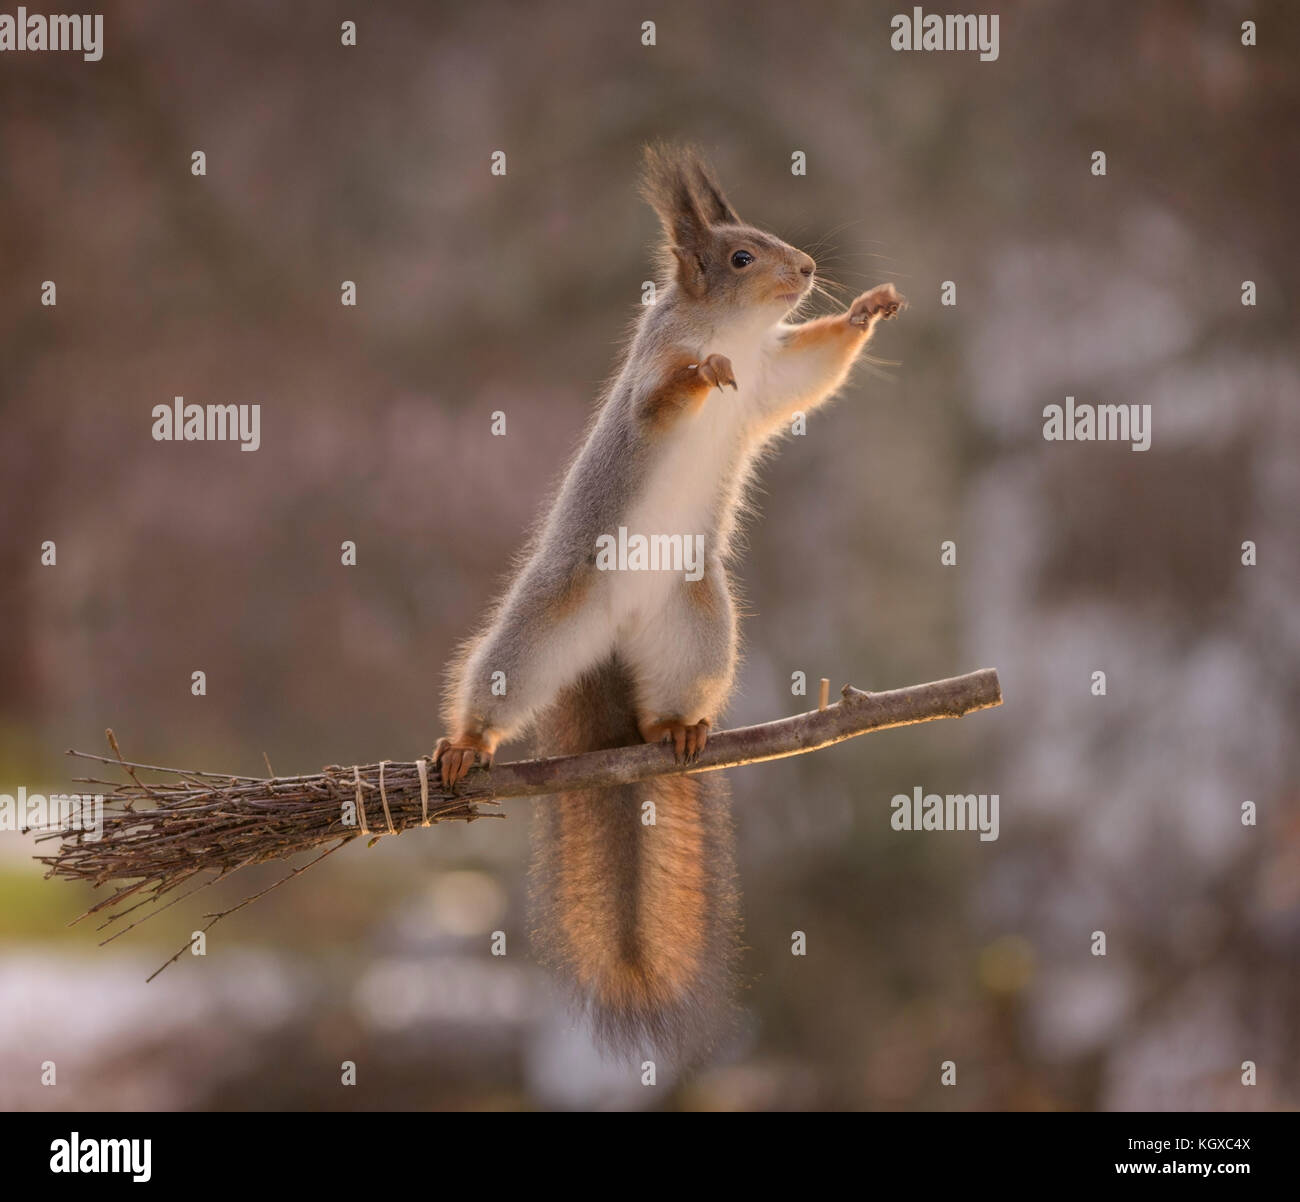 INCREDIBLE images have captured a group of Red squirrels indulging in a game of Harry Potter’s favourite sport, quidditch. The stunning shots show the Stock Photo